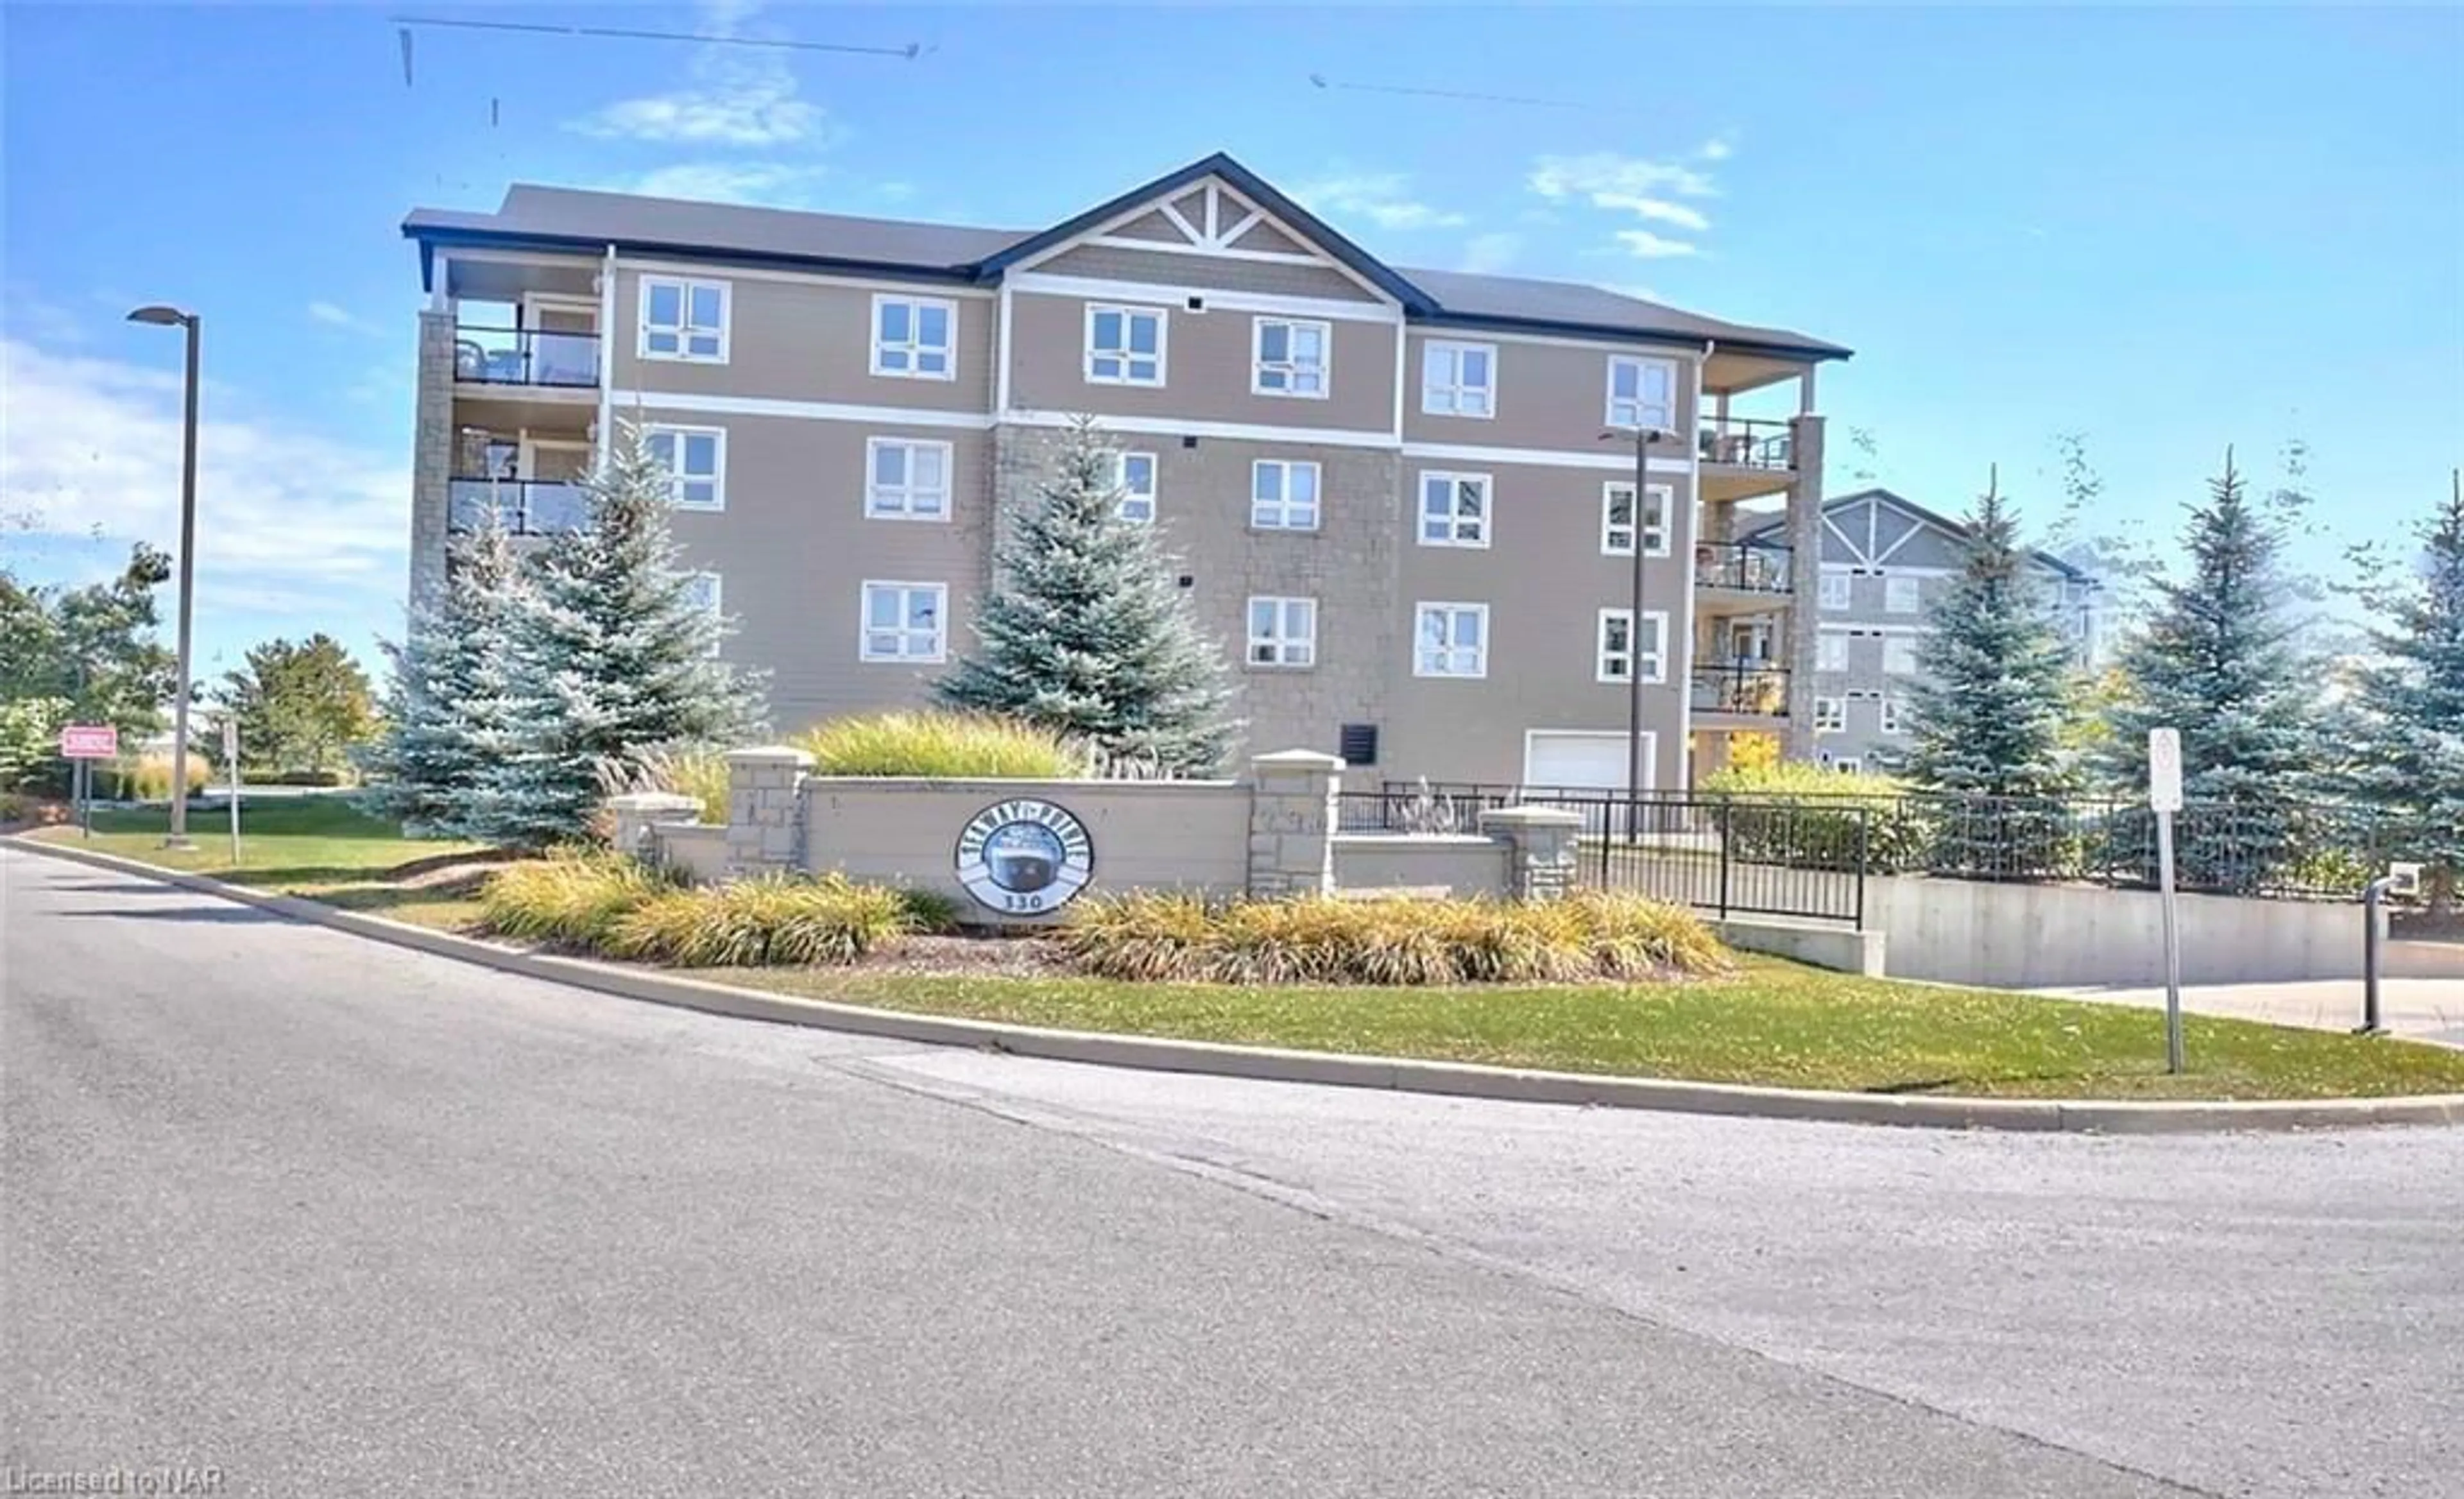 A pic from exterior of the house or condo for 330 Prince Charles Dr #1314, Welland Ontario L3C 7B3